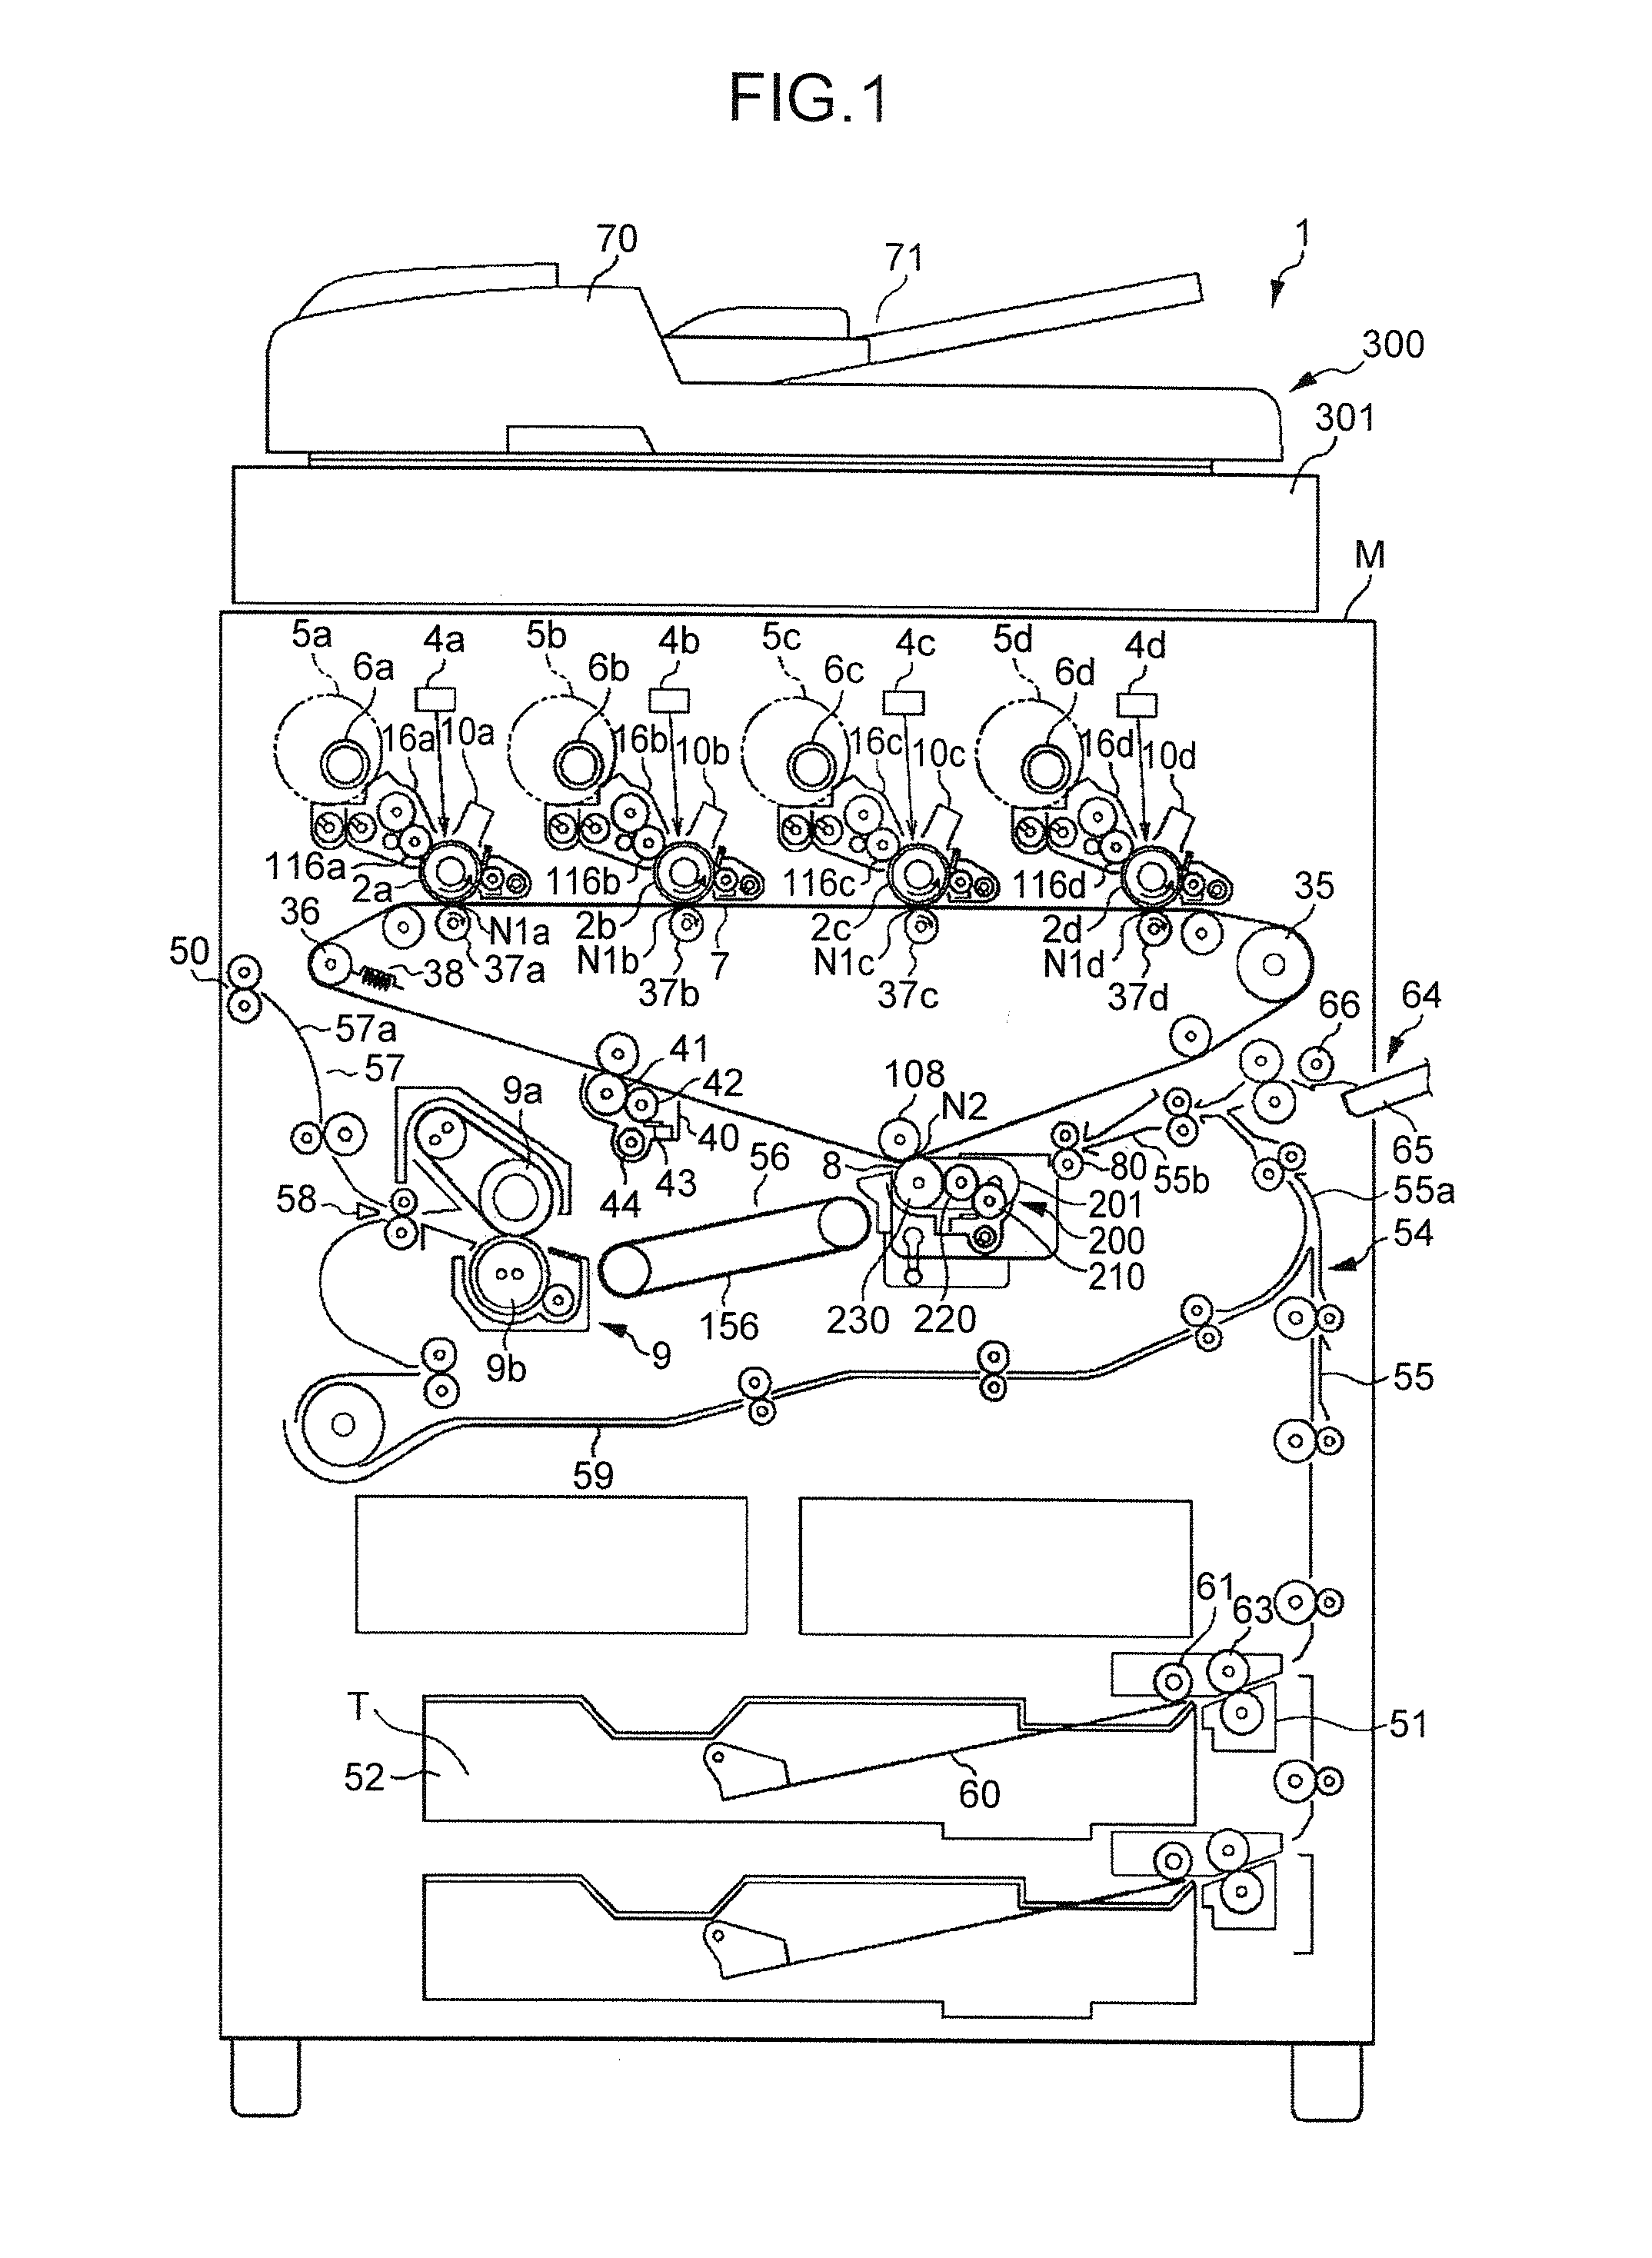 Image reading apparatus and image forming apparatus